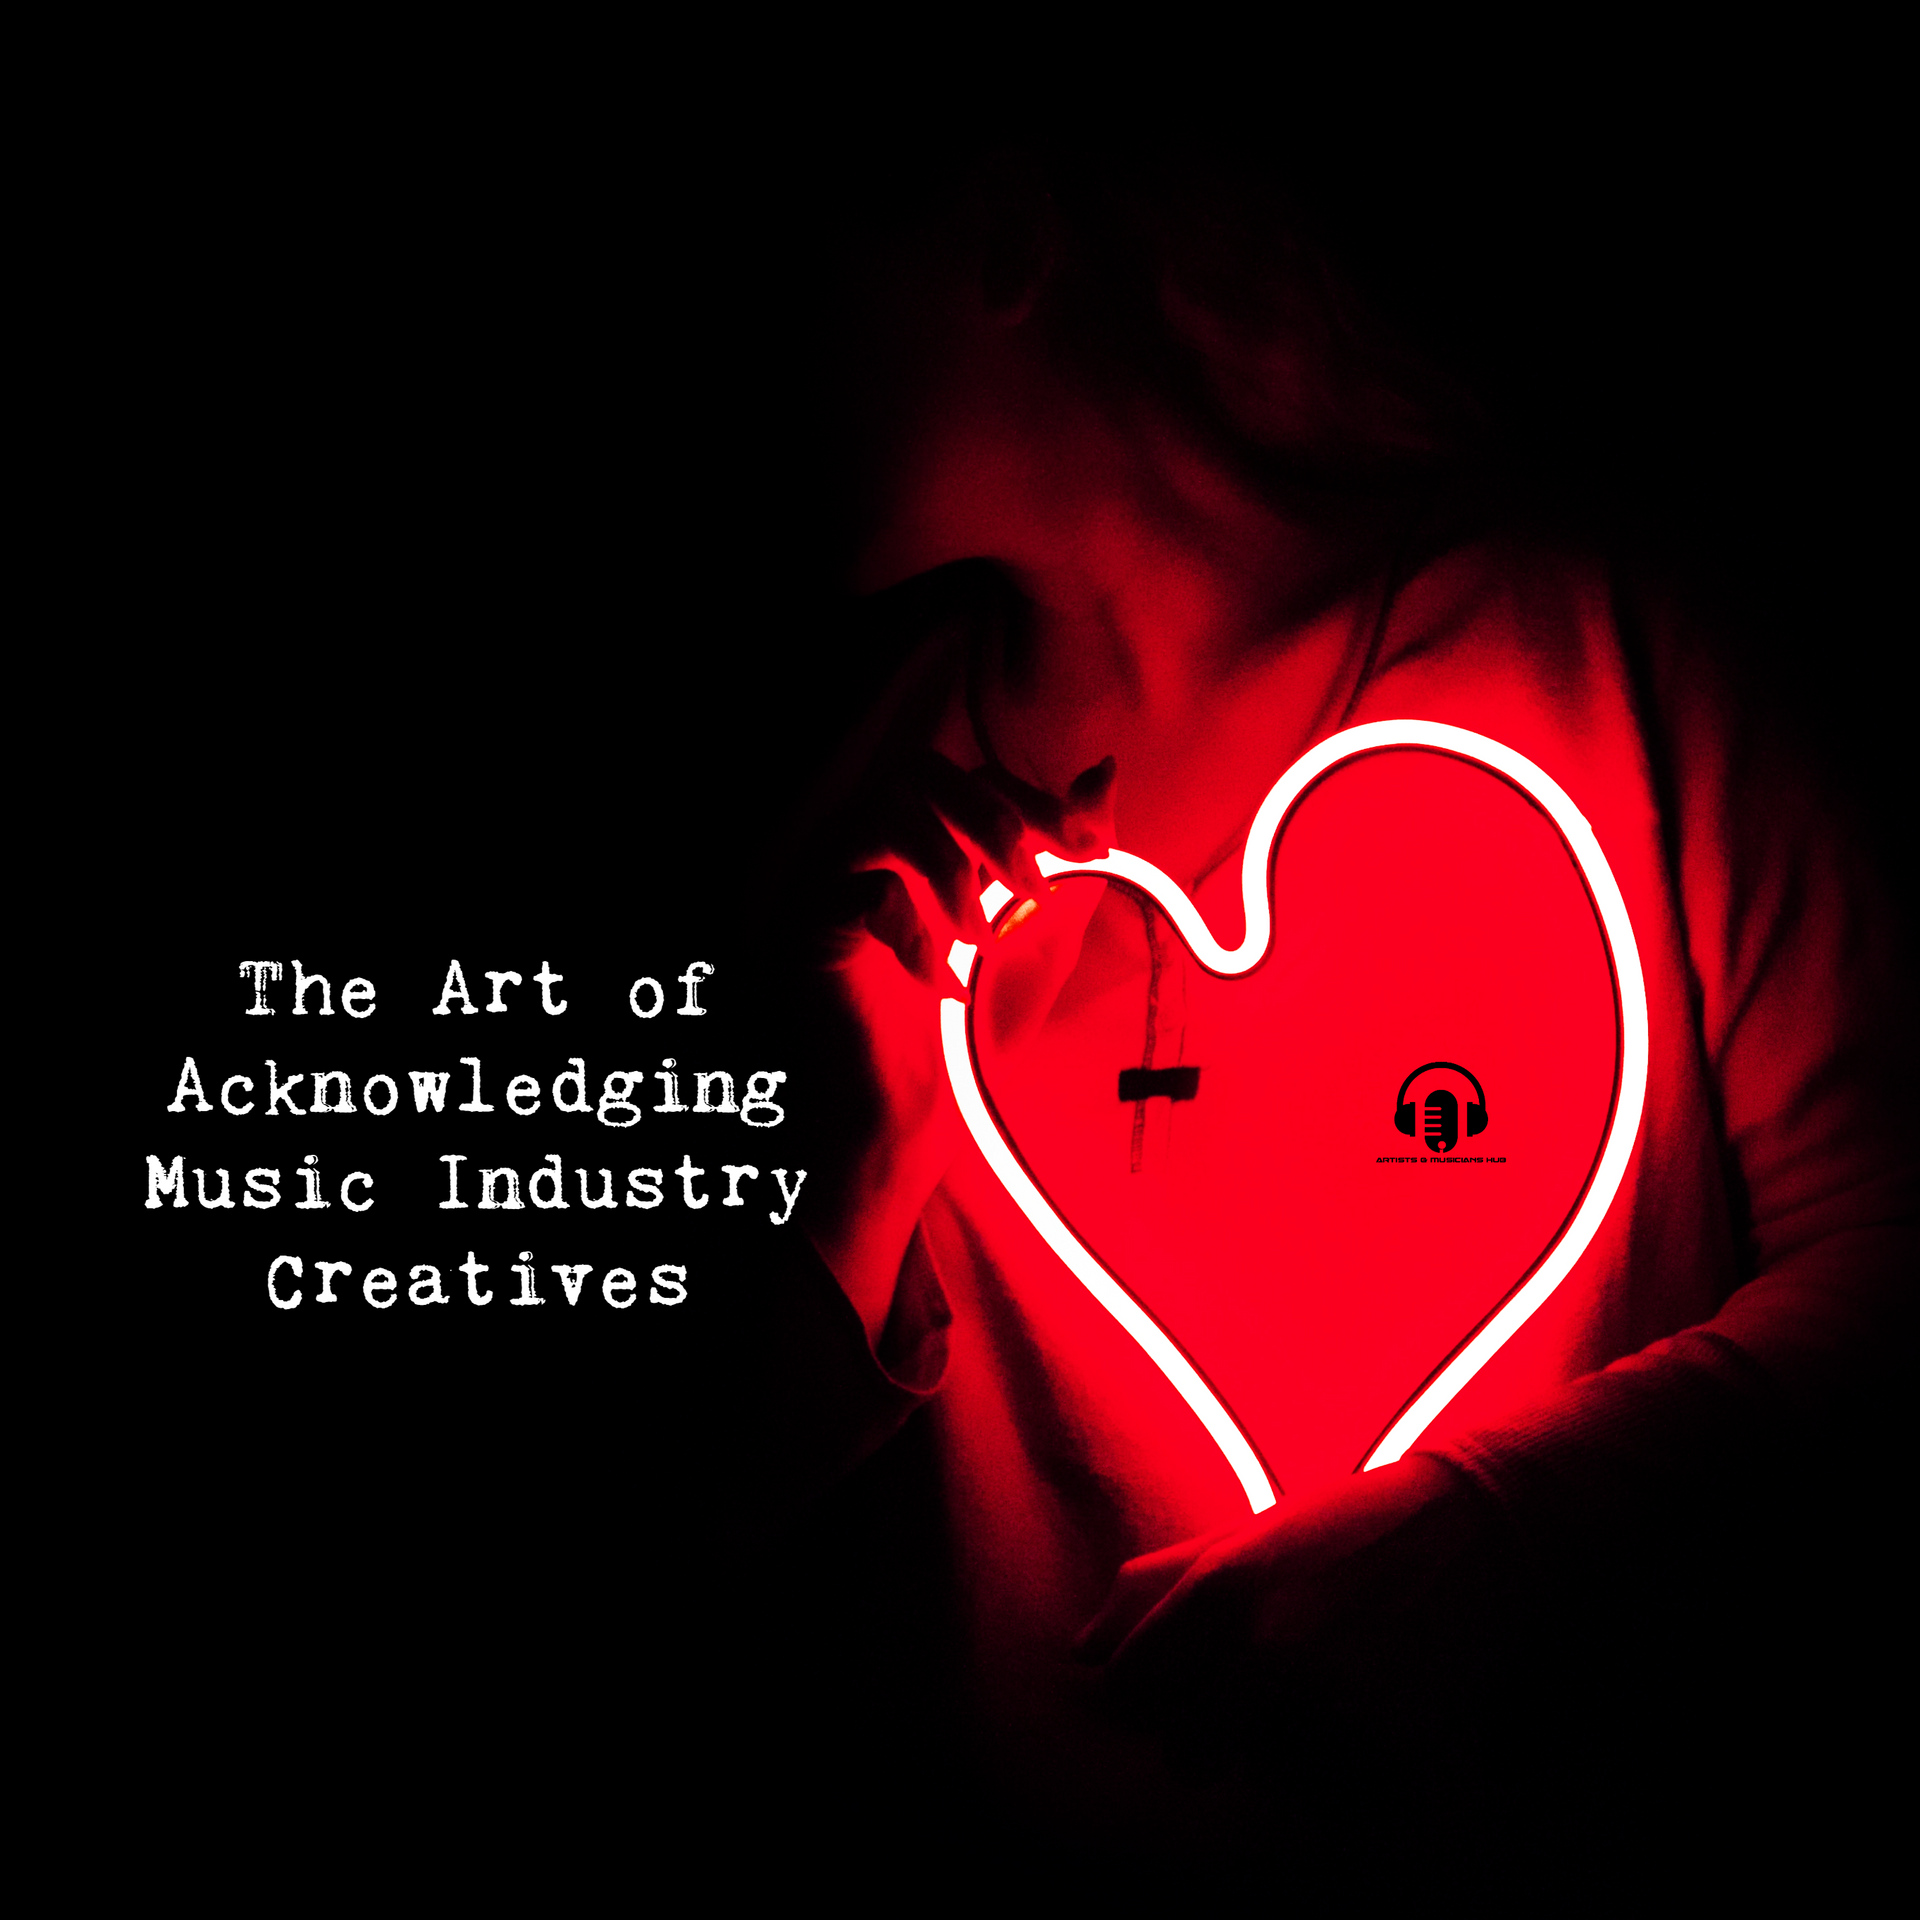 The Art of Acknowledging Music Industry Creatives